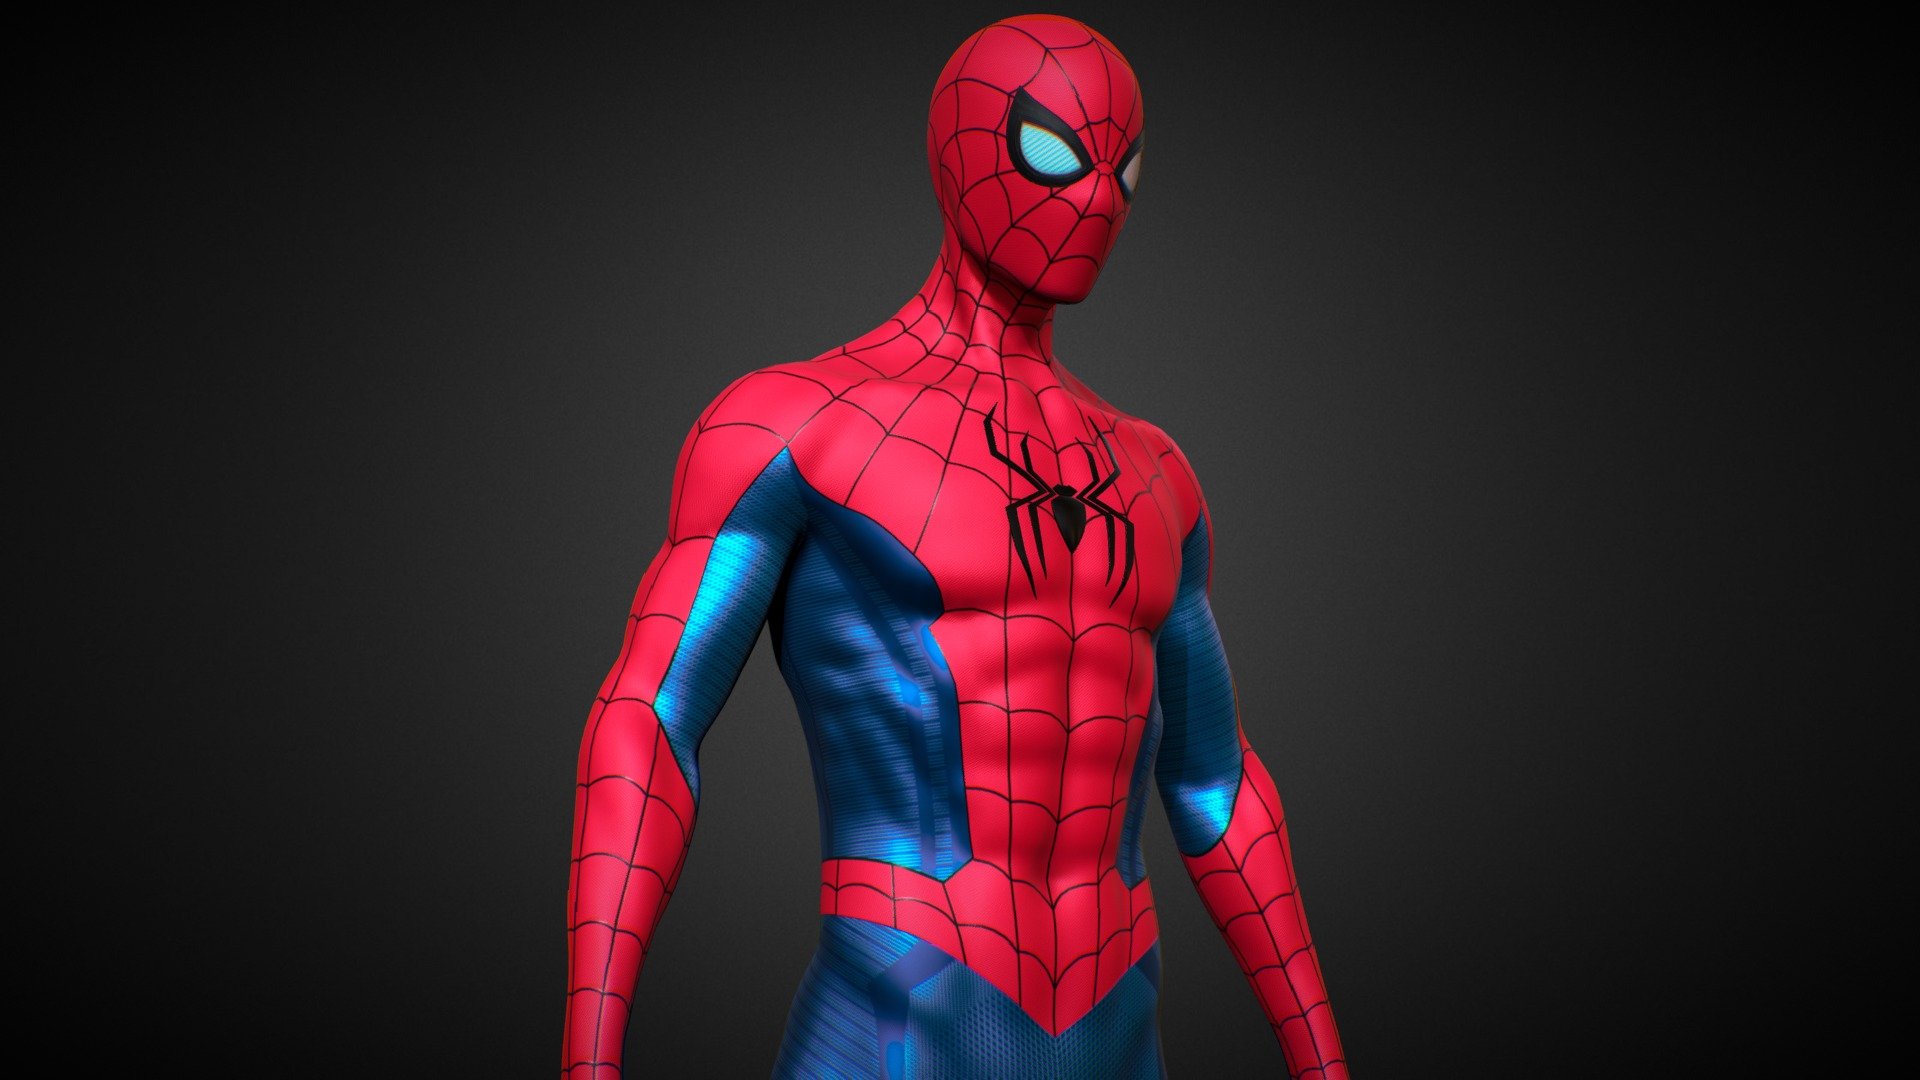 Spiderman comic books character published by Marvel Comics. 




Model was made on Maya, Zbrush, substance painter  and Blender . 

This model is inspired by Tom holland spiderman no way home ending scene suit

The model has a Spiderman no way home ending scene suit

High quality texture work.

The model comes with complete 4k textures and Blender, FBX And OBJ file formats 

The model has 5 materials 1 material is a glass material without any map and other 4 materials contains 5 maps Basecolor, Roughness, Metalness, Normal and Ao

All textures and materials are included and mapped. (4k resoulutions)

No special plugin needed to open scene

The model can be rigg easily
 - Spider-Man No Way Home Final Suit - Buy Royalty Free 3D model by AFSHAN ALI (@Aliflex) 3d model